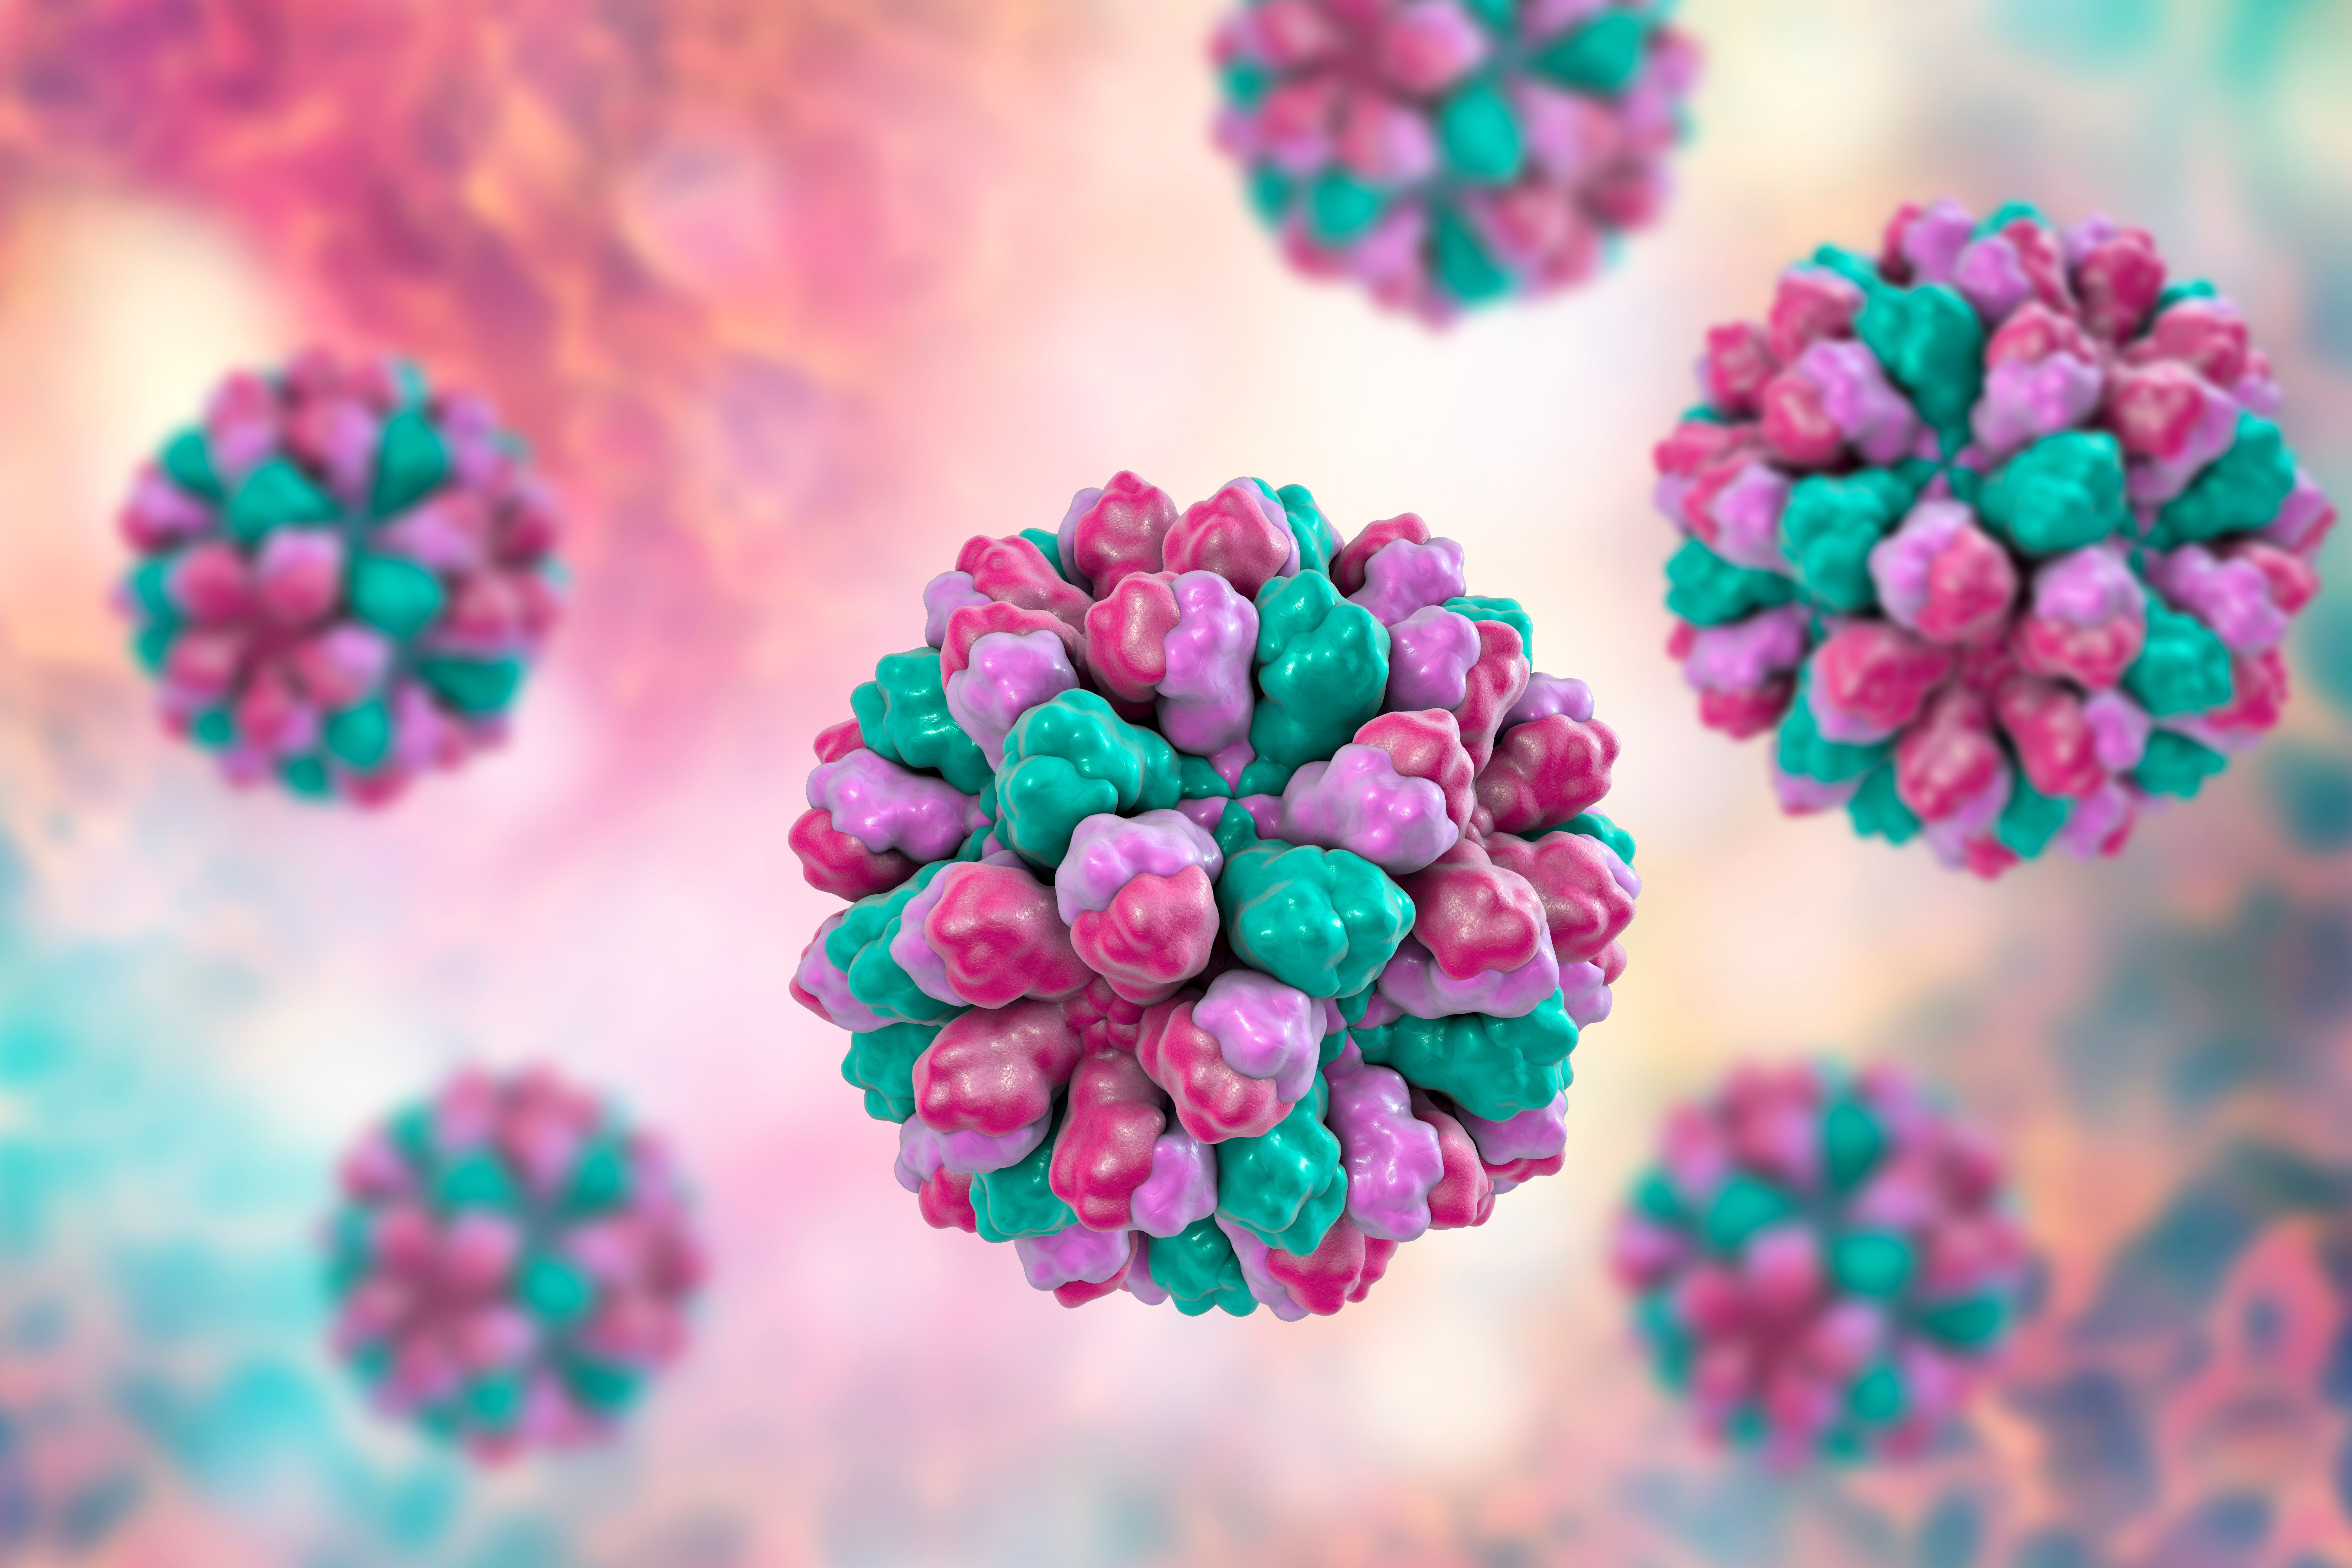 Norovirus infections are spiking this season. These are the signs and symptoms associated with America’s leading cause of foodborne illness.